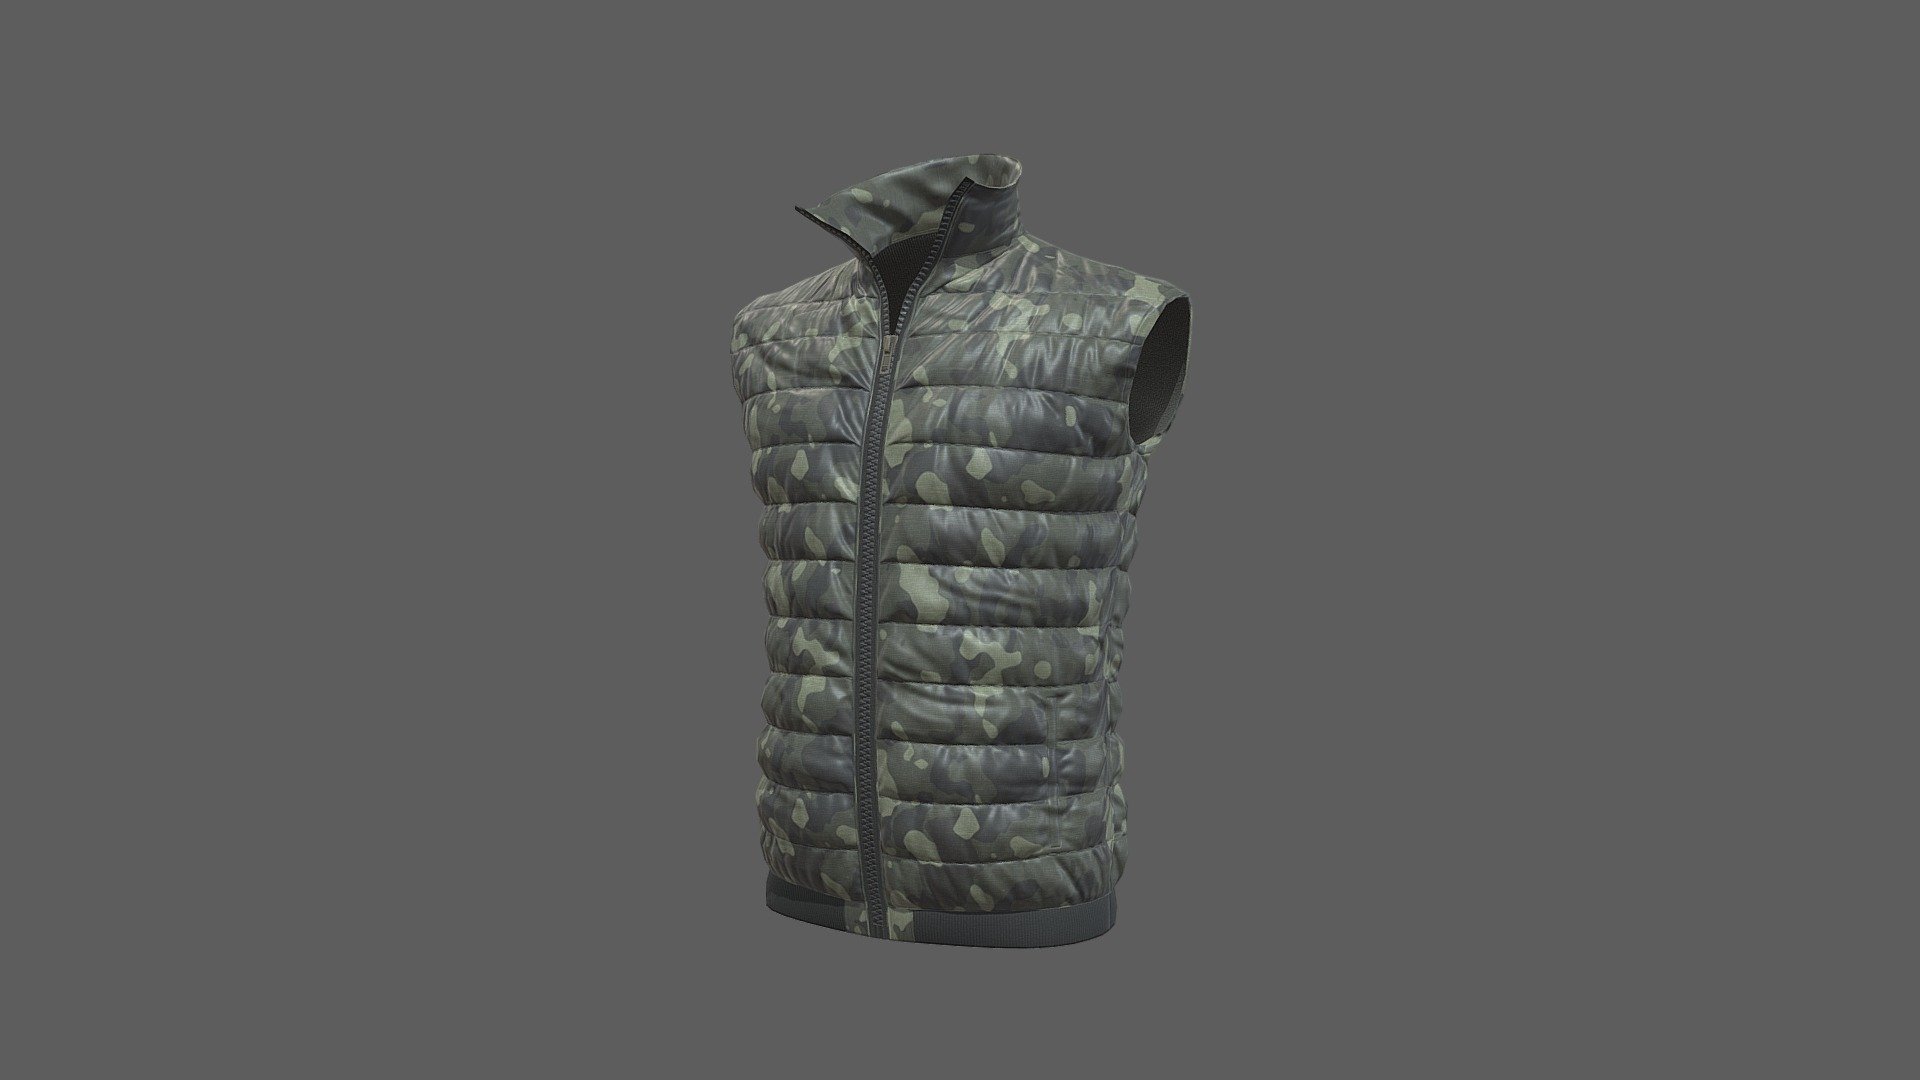 Lowpoly Camouflage Winter Jacket with 4k High Quality Textures. 
Suitable for Fashion AR &amp; Spark AR. 
Optimized for AR, VR, Game Engines and Real-Time Visualization. 
Realistic PBR Texturing 3d model